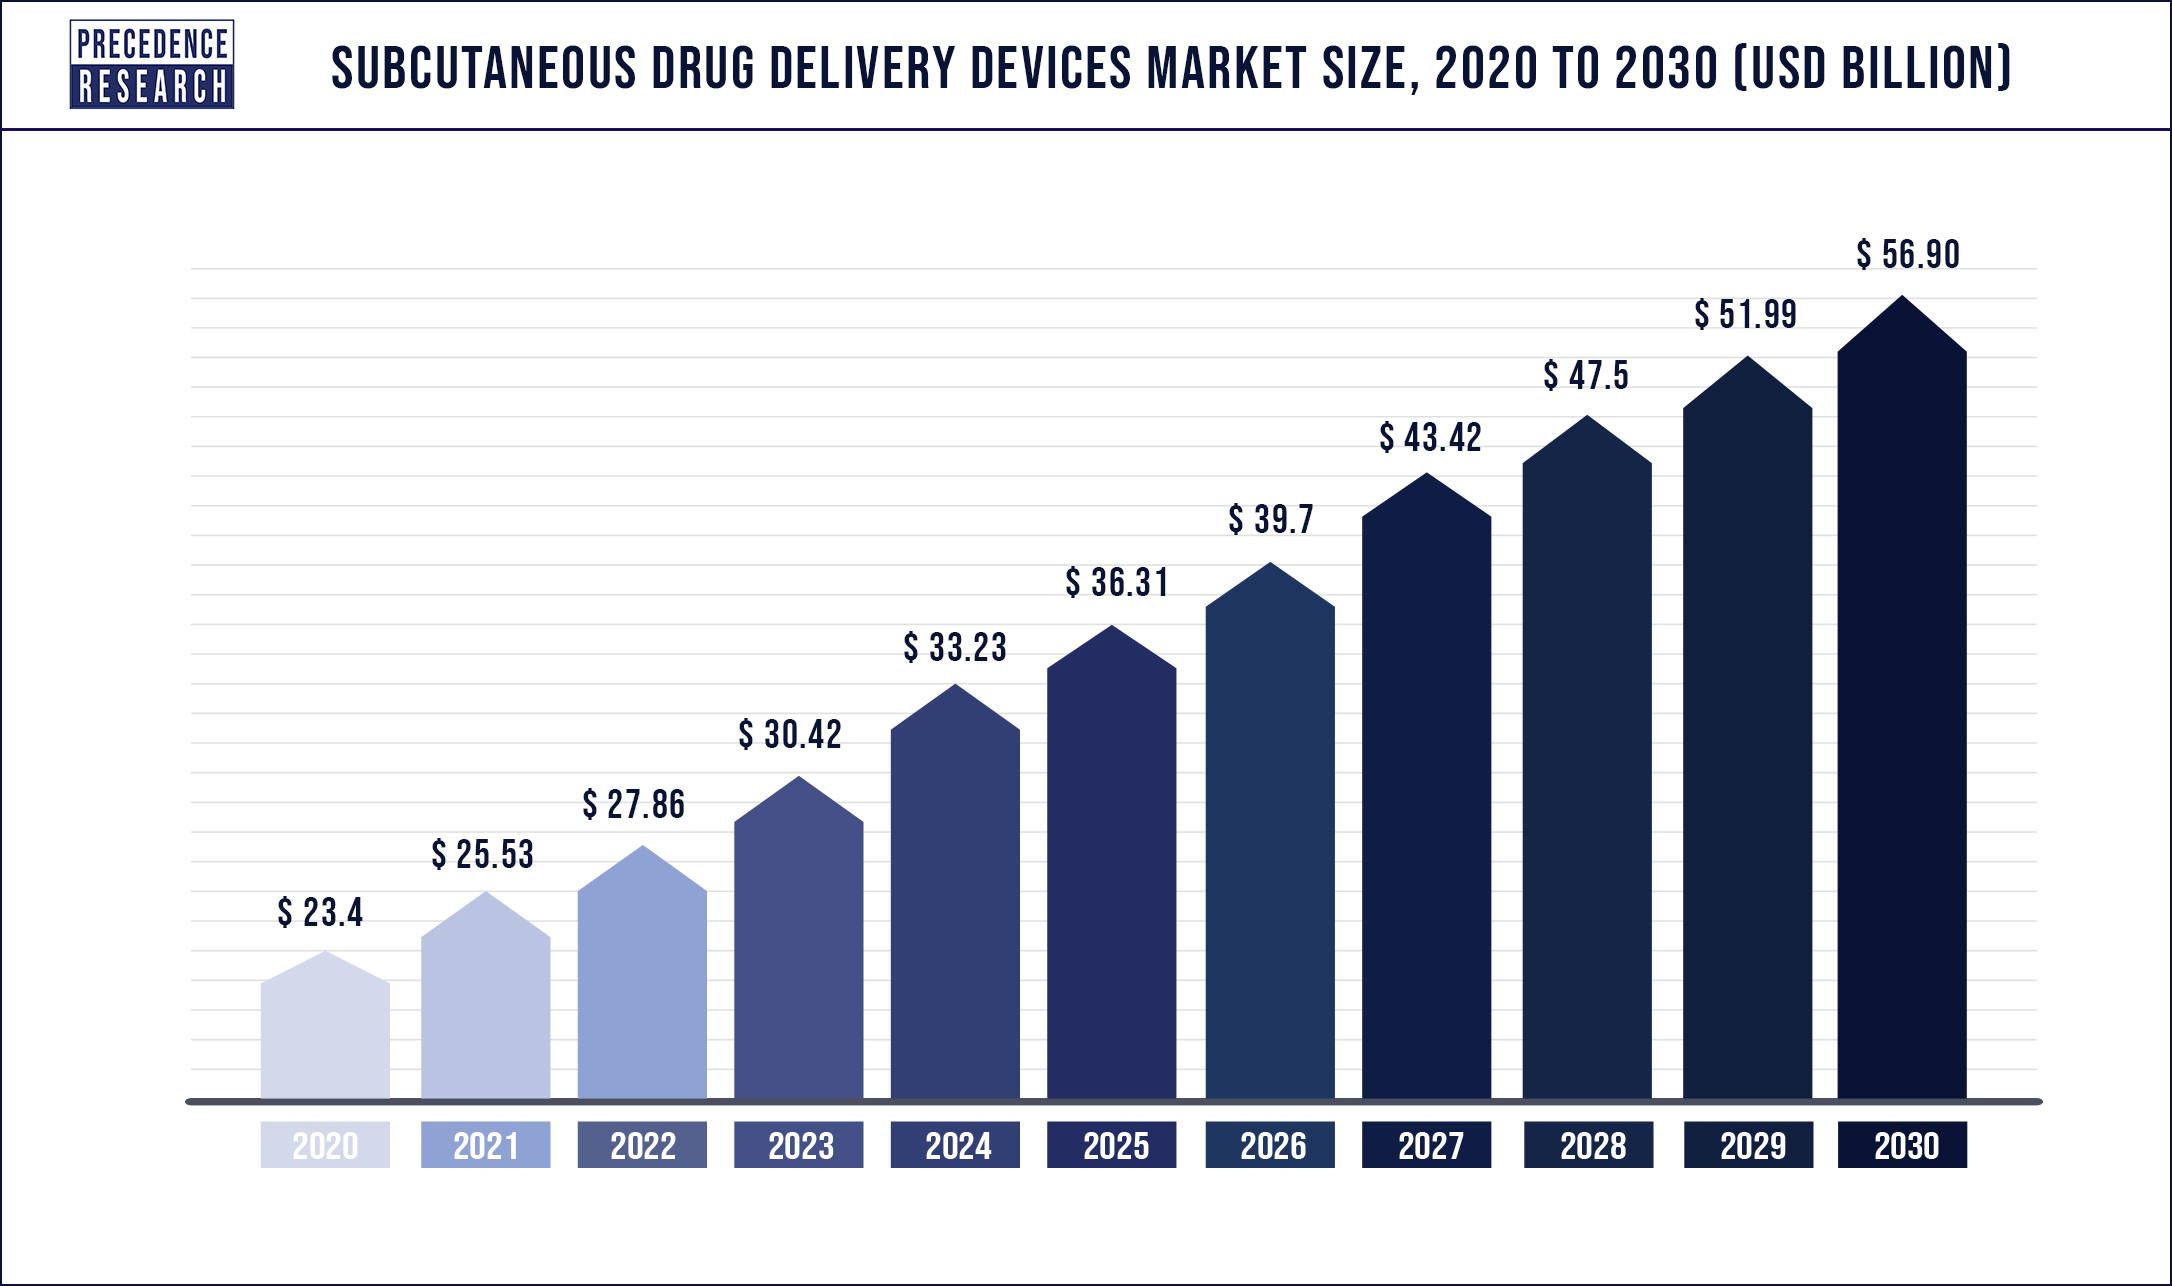 Subcutaneous Drug Delivery Devices Market Size to Hit US$ 56.9 Billion By 2030